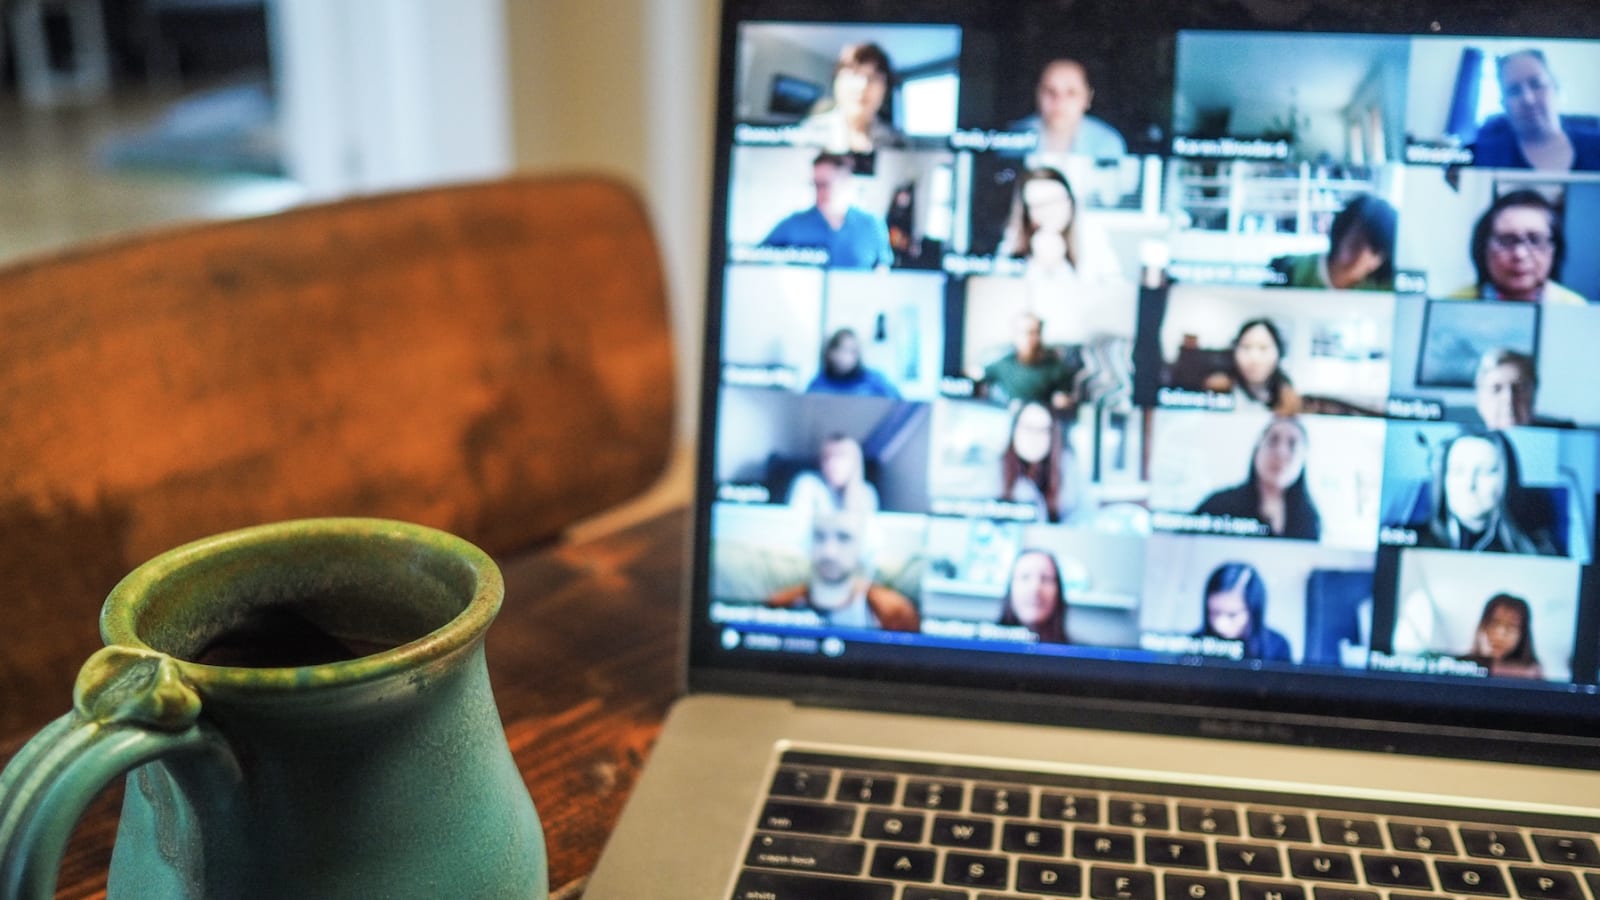 Should employers force employees to turn on webcam during online meetings?  - DEV Community